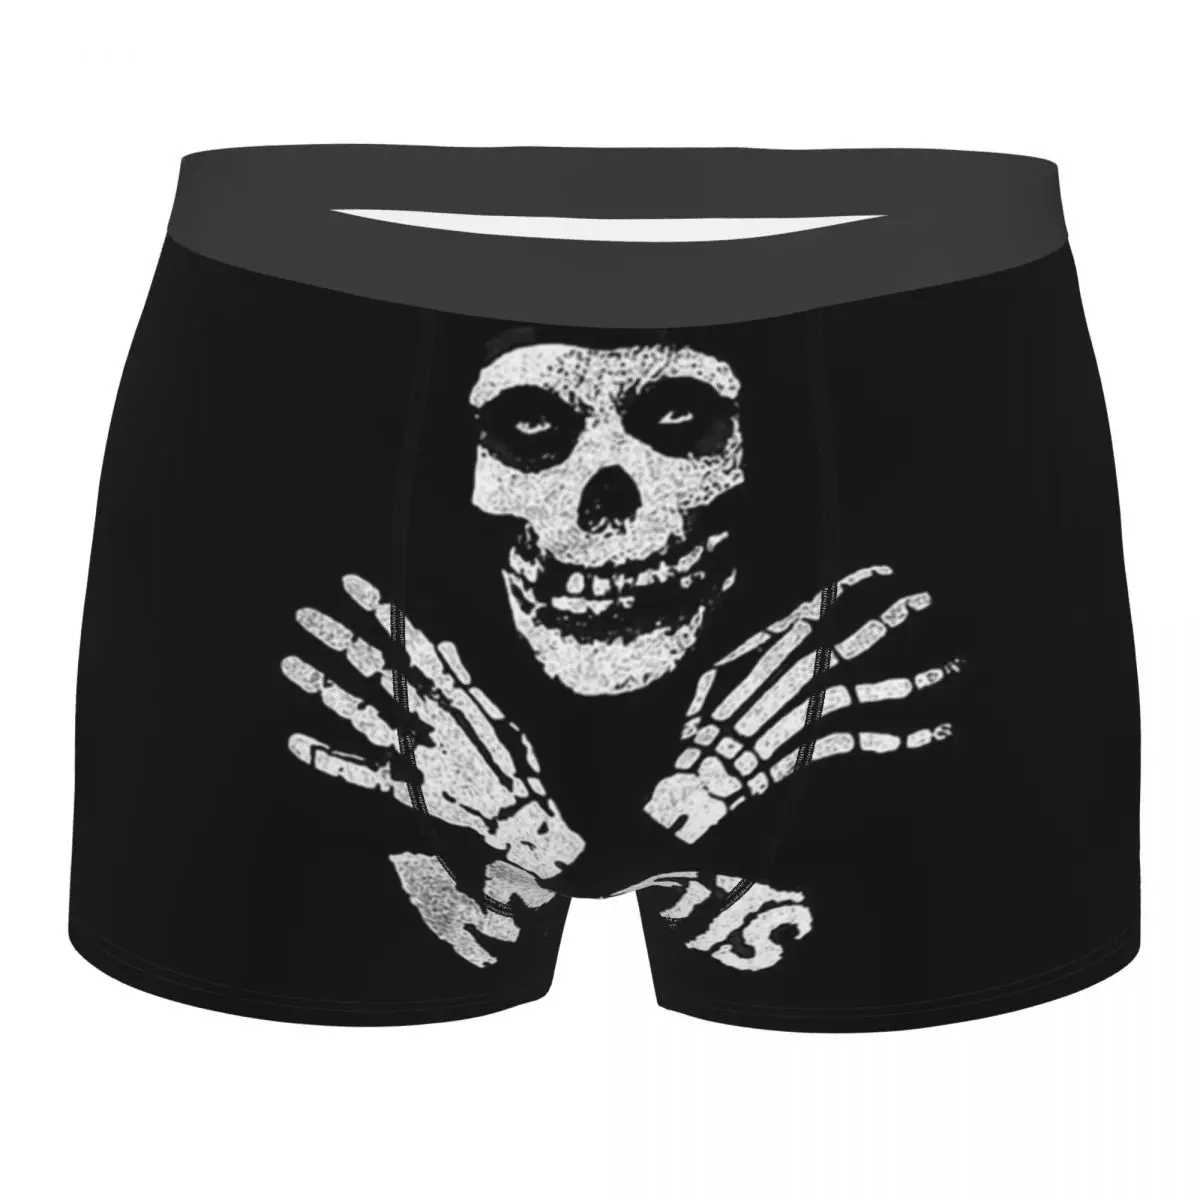 Misfits Skull Man's Underwear Highly Breathable High Quality Gift Idea